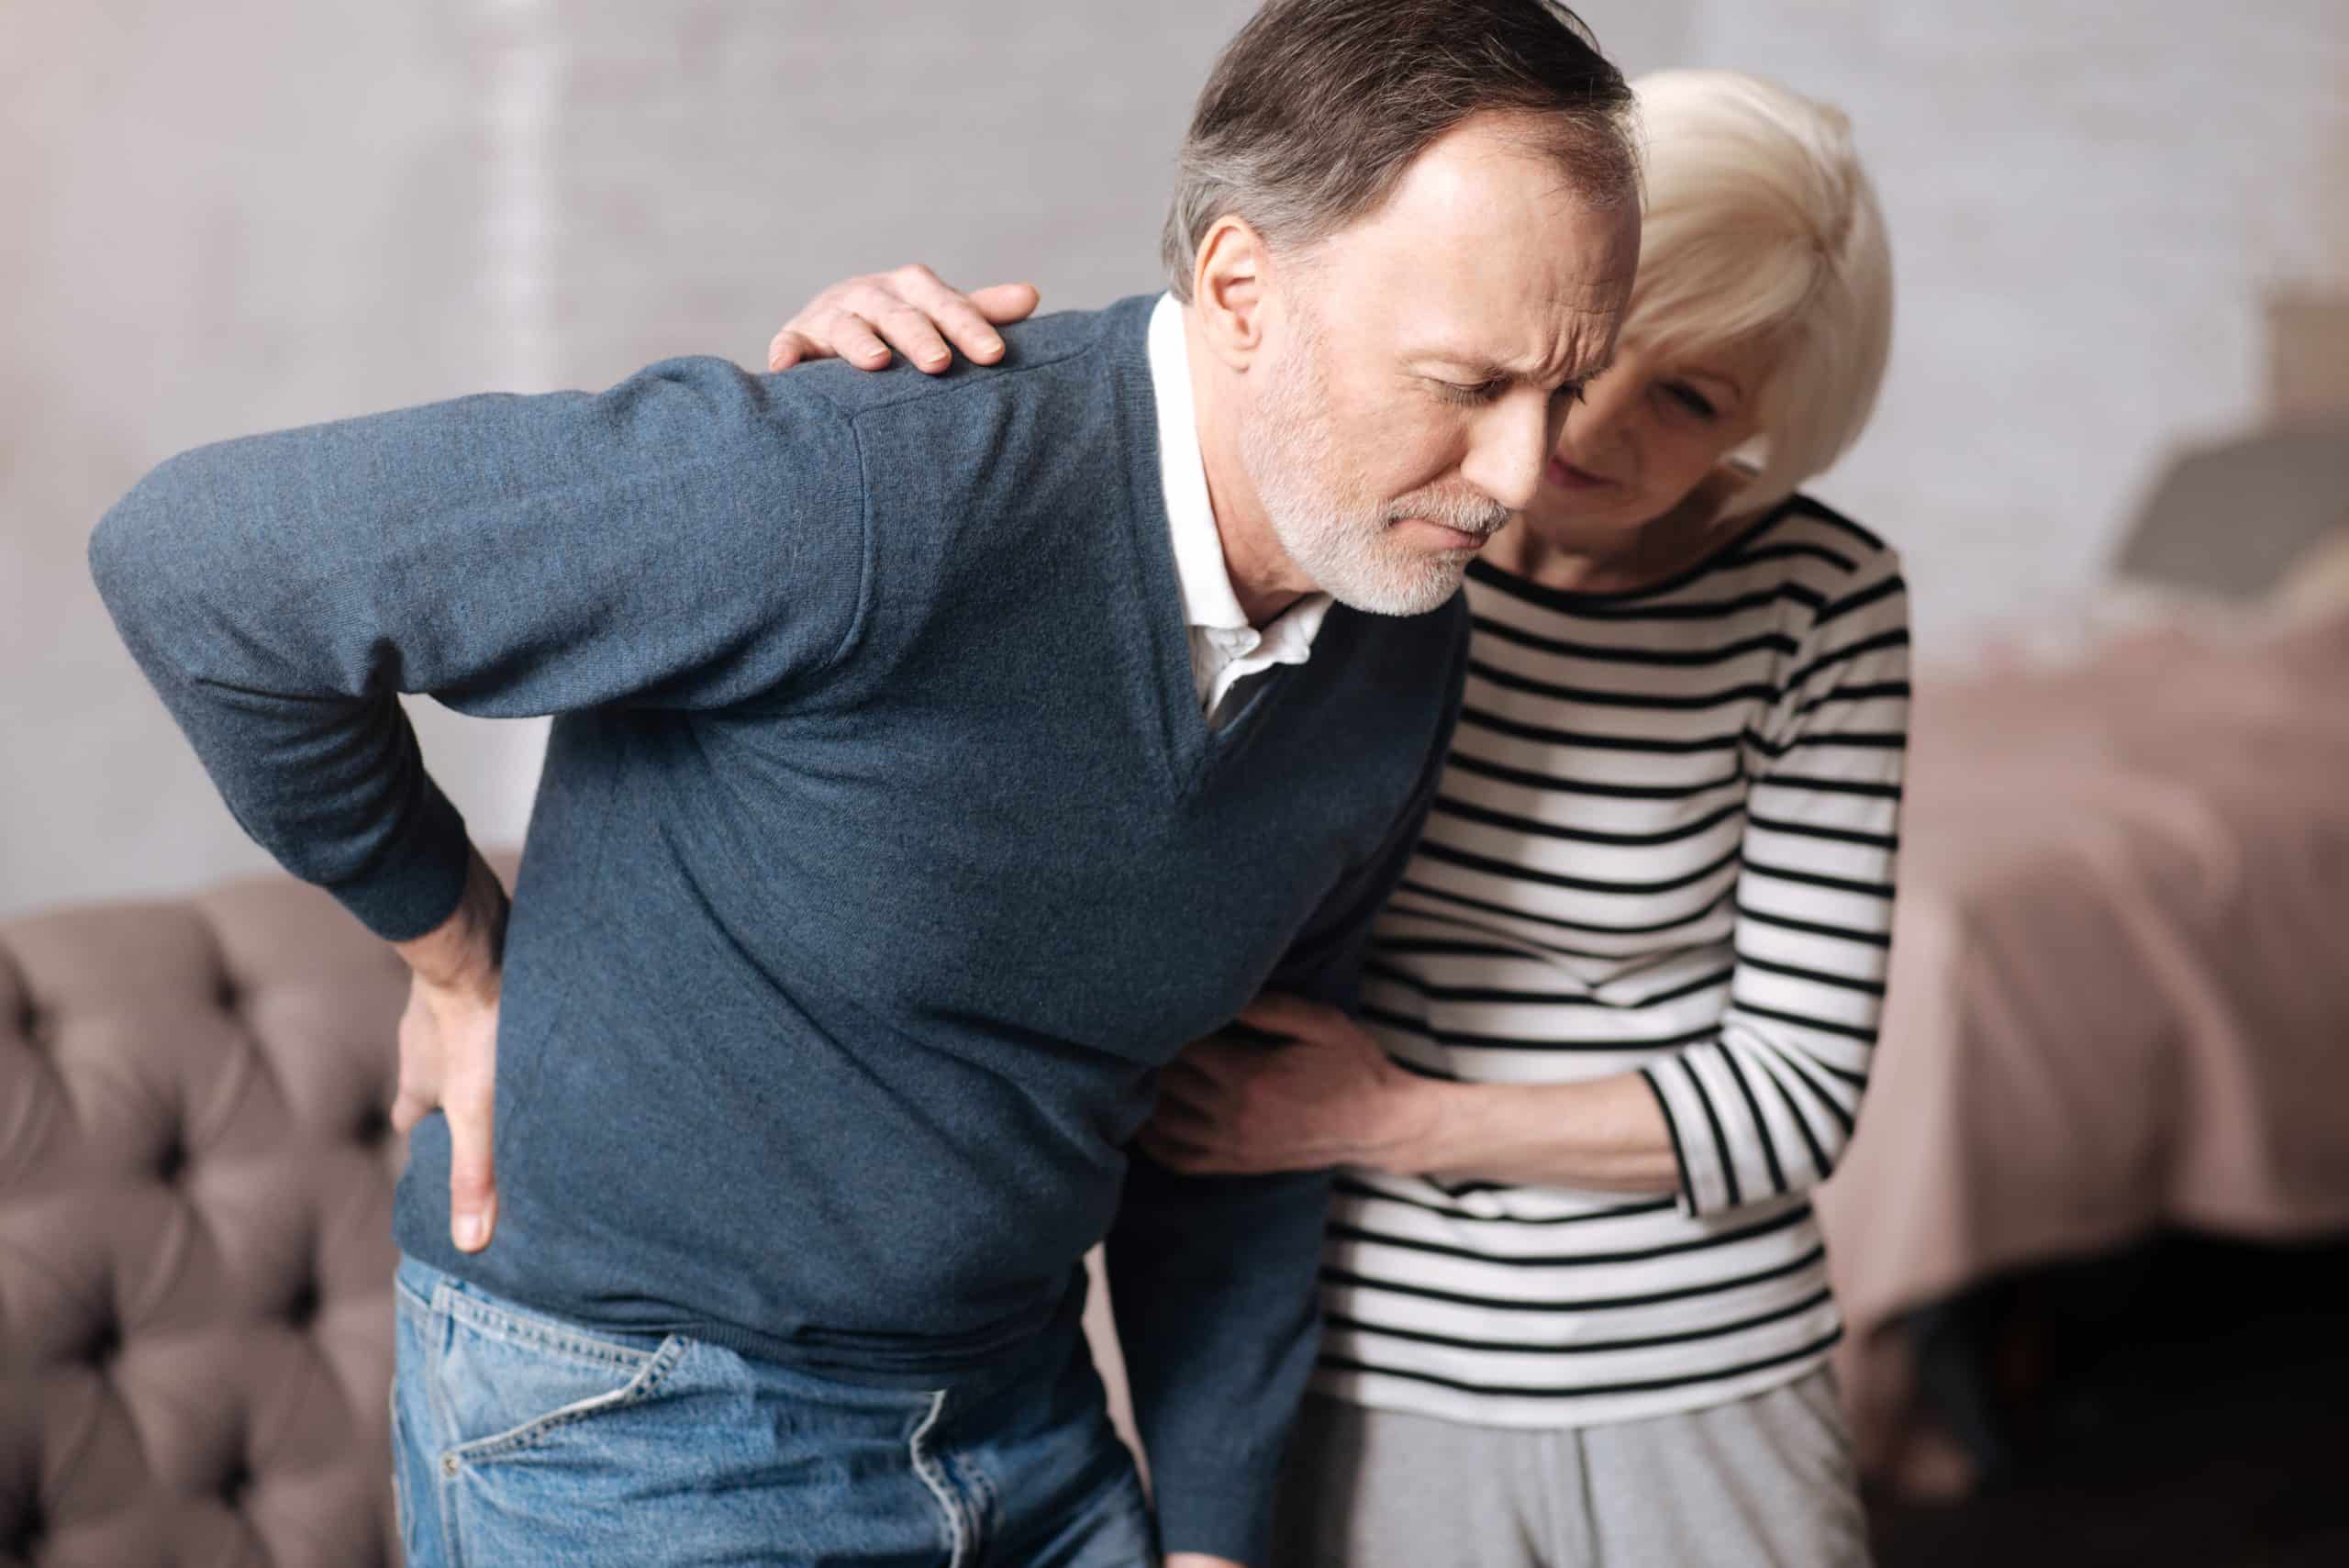 back pain in older adults